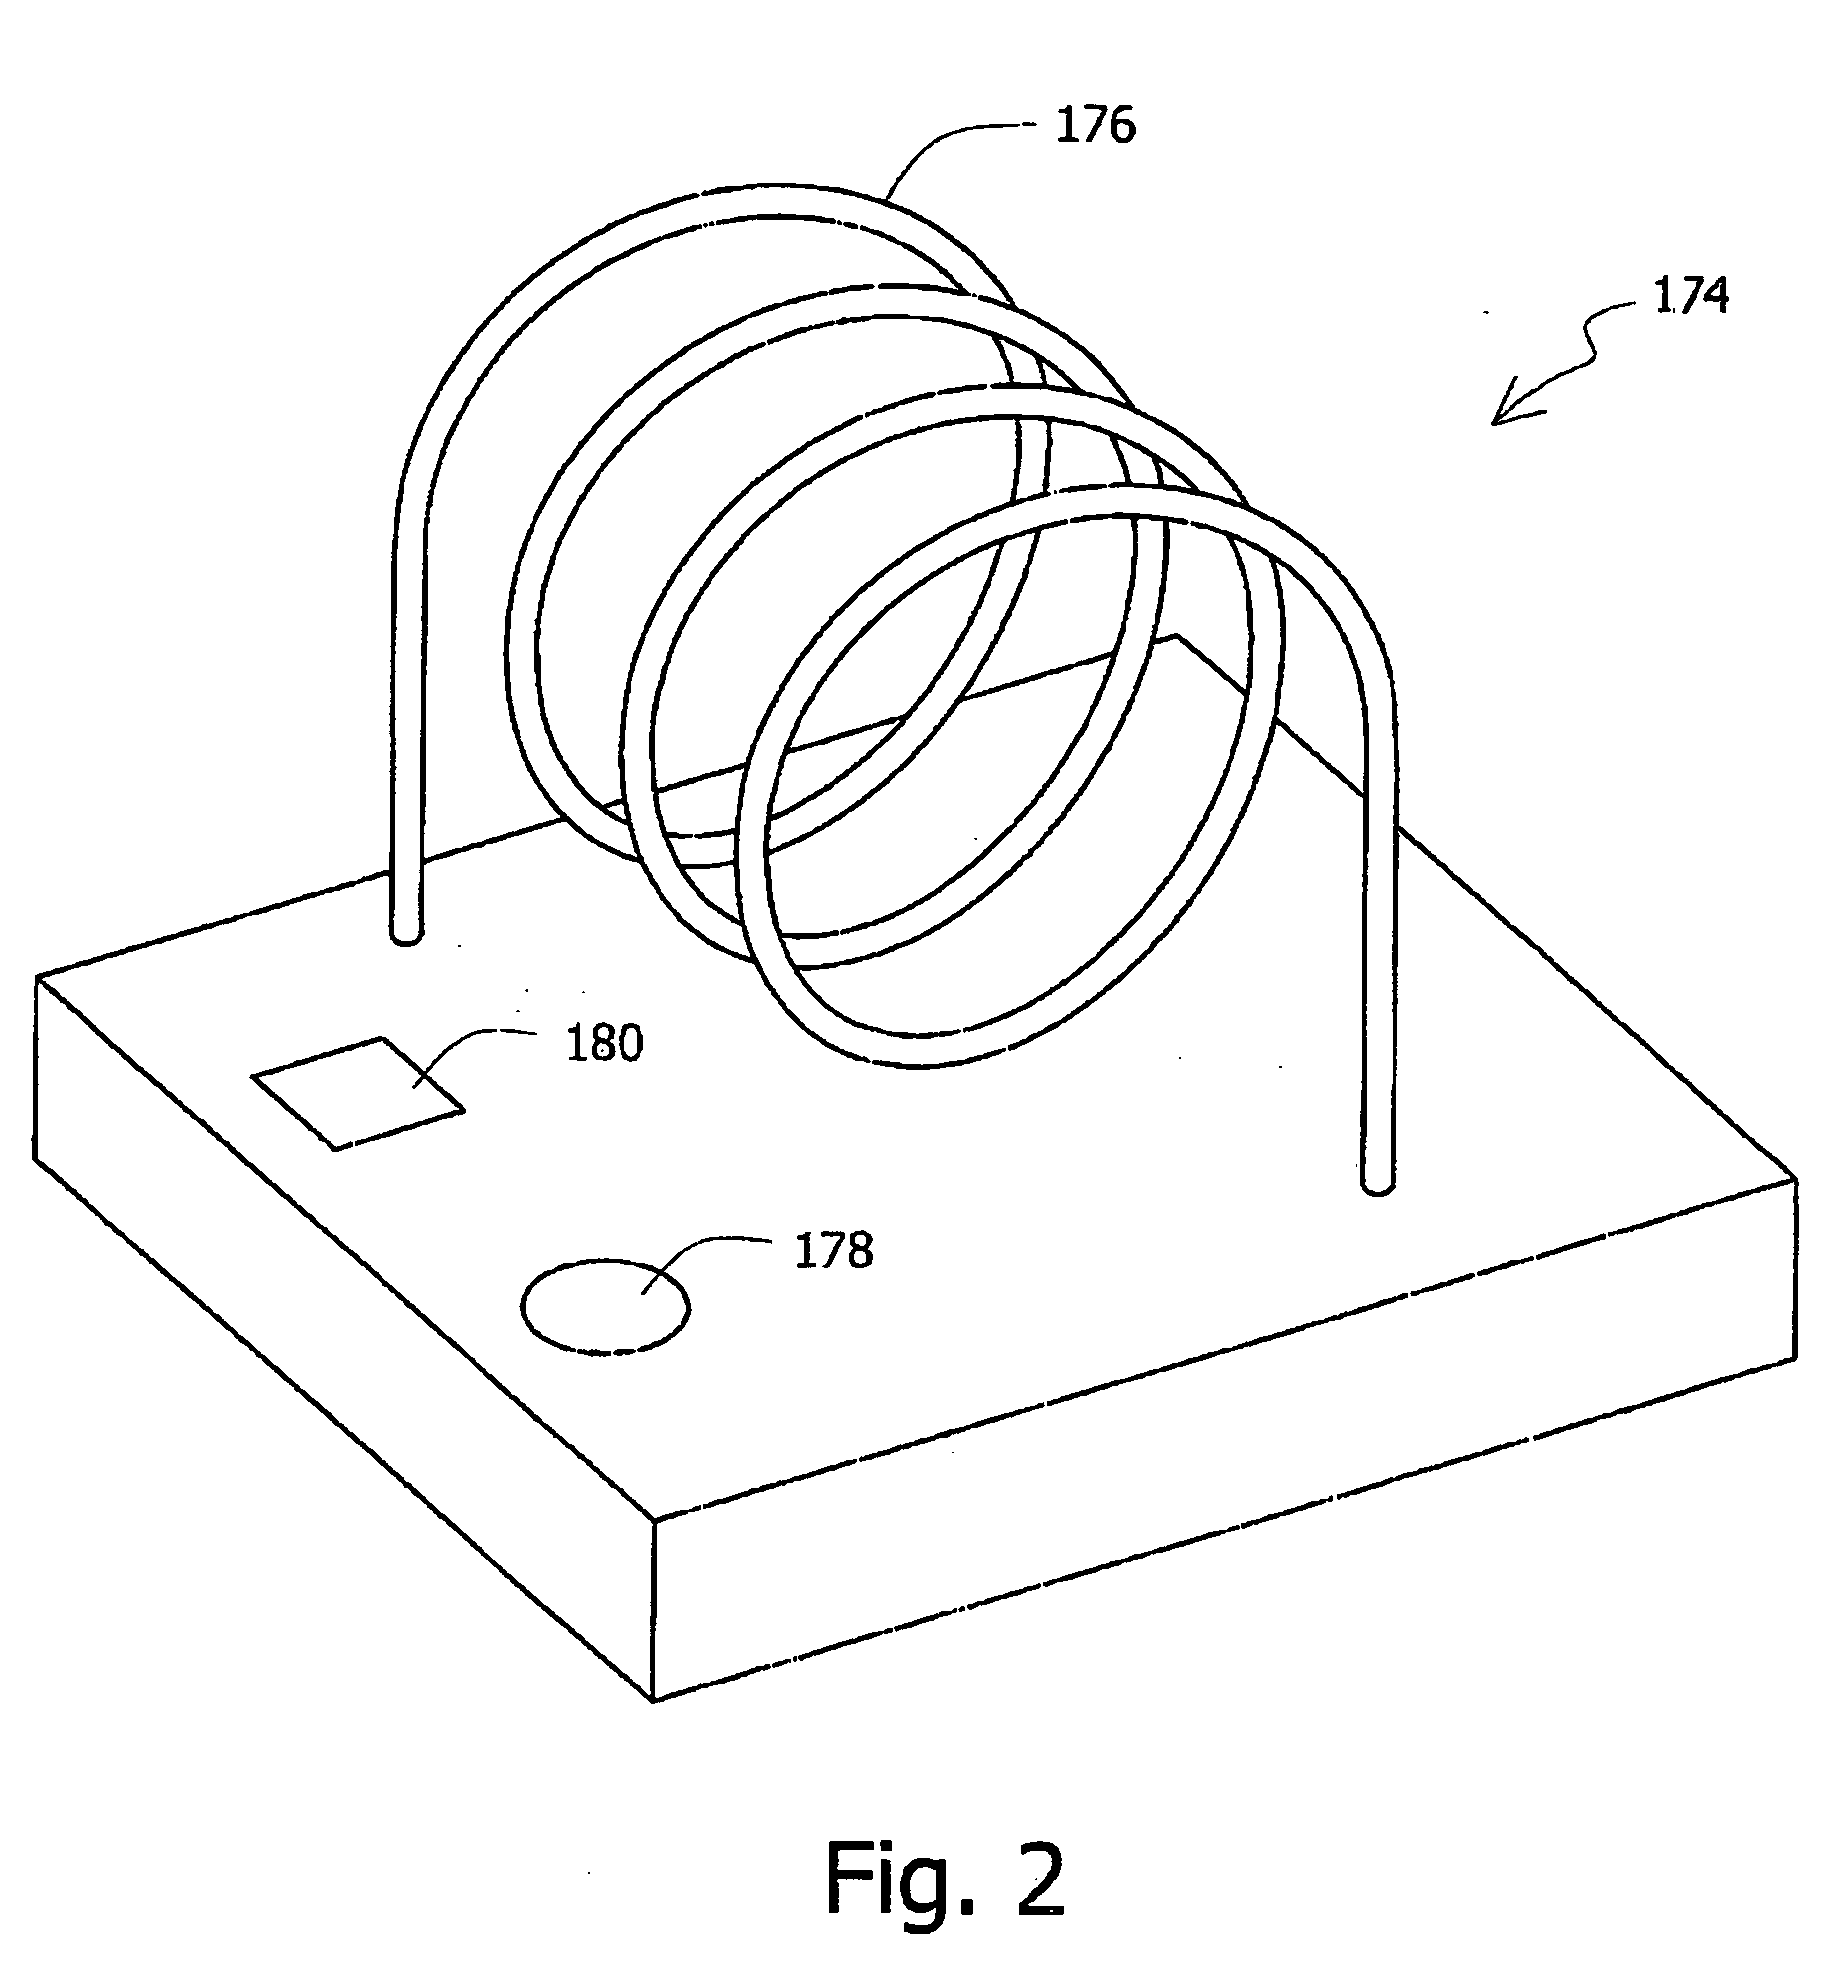 Device, method and system for activating an in-vivo imaging device